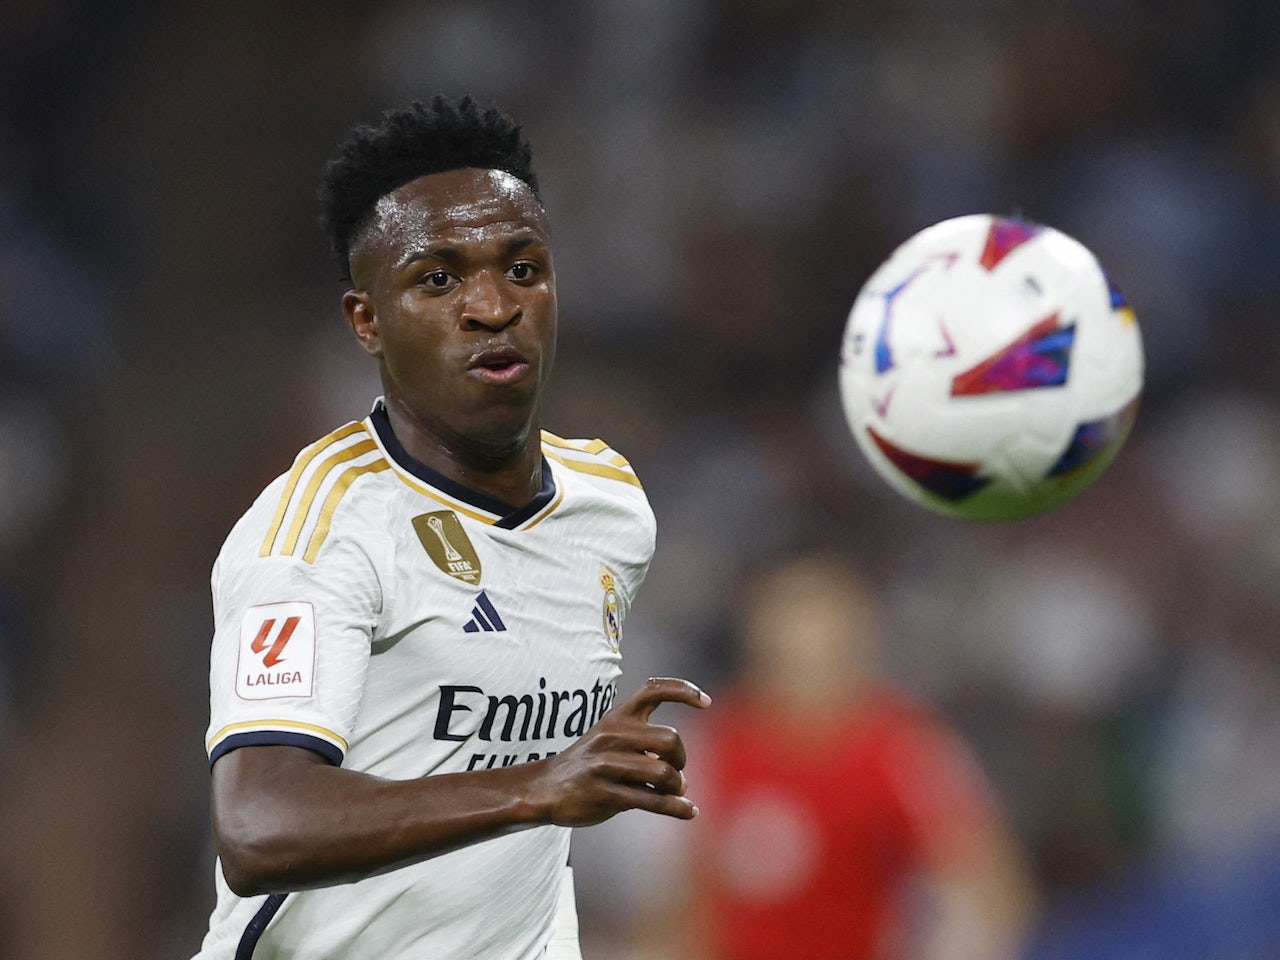 Real Madrid's Vinicius Junior ruled out for 10 weeks with hamstring injury